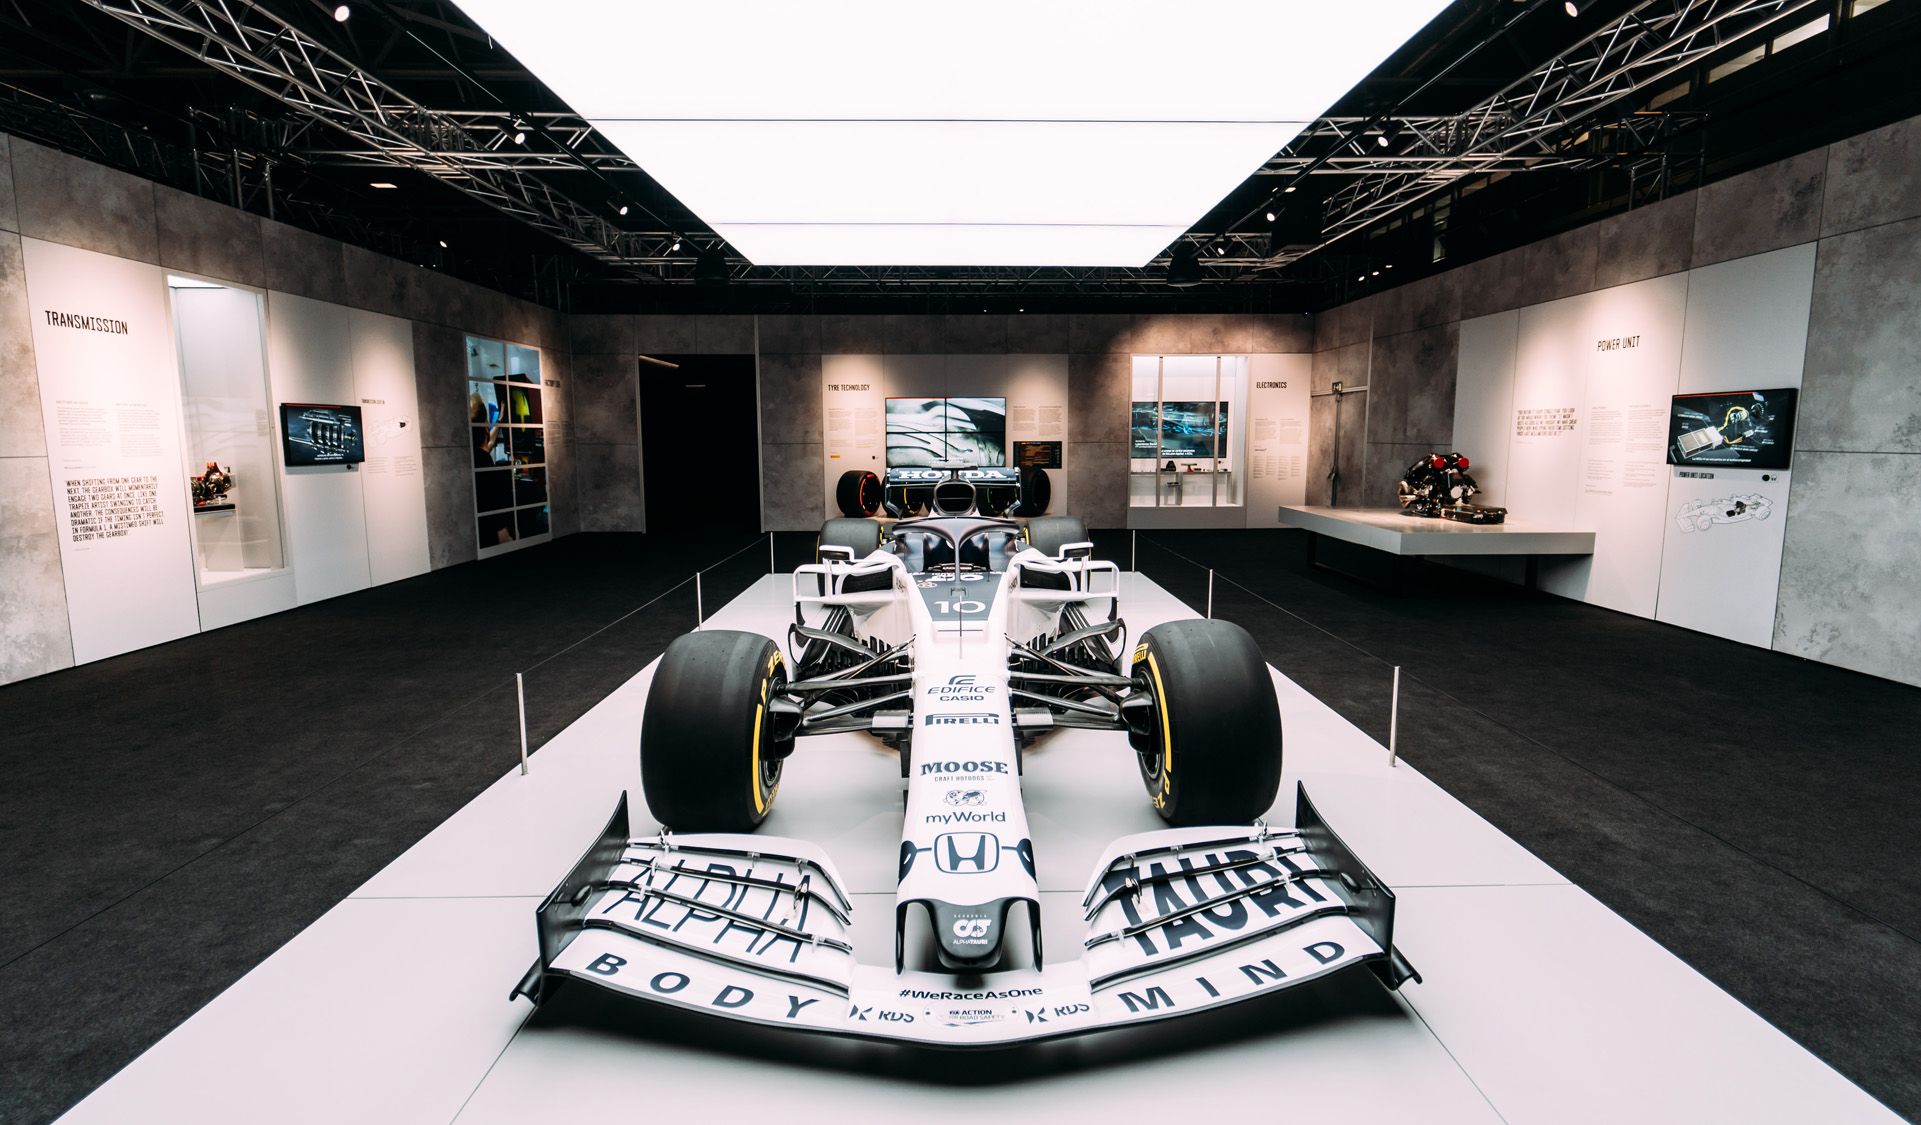 Formula 1 Simulators Are Crucial to Race Prep. Here's How It Works.